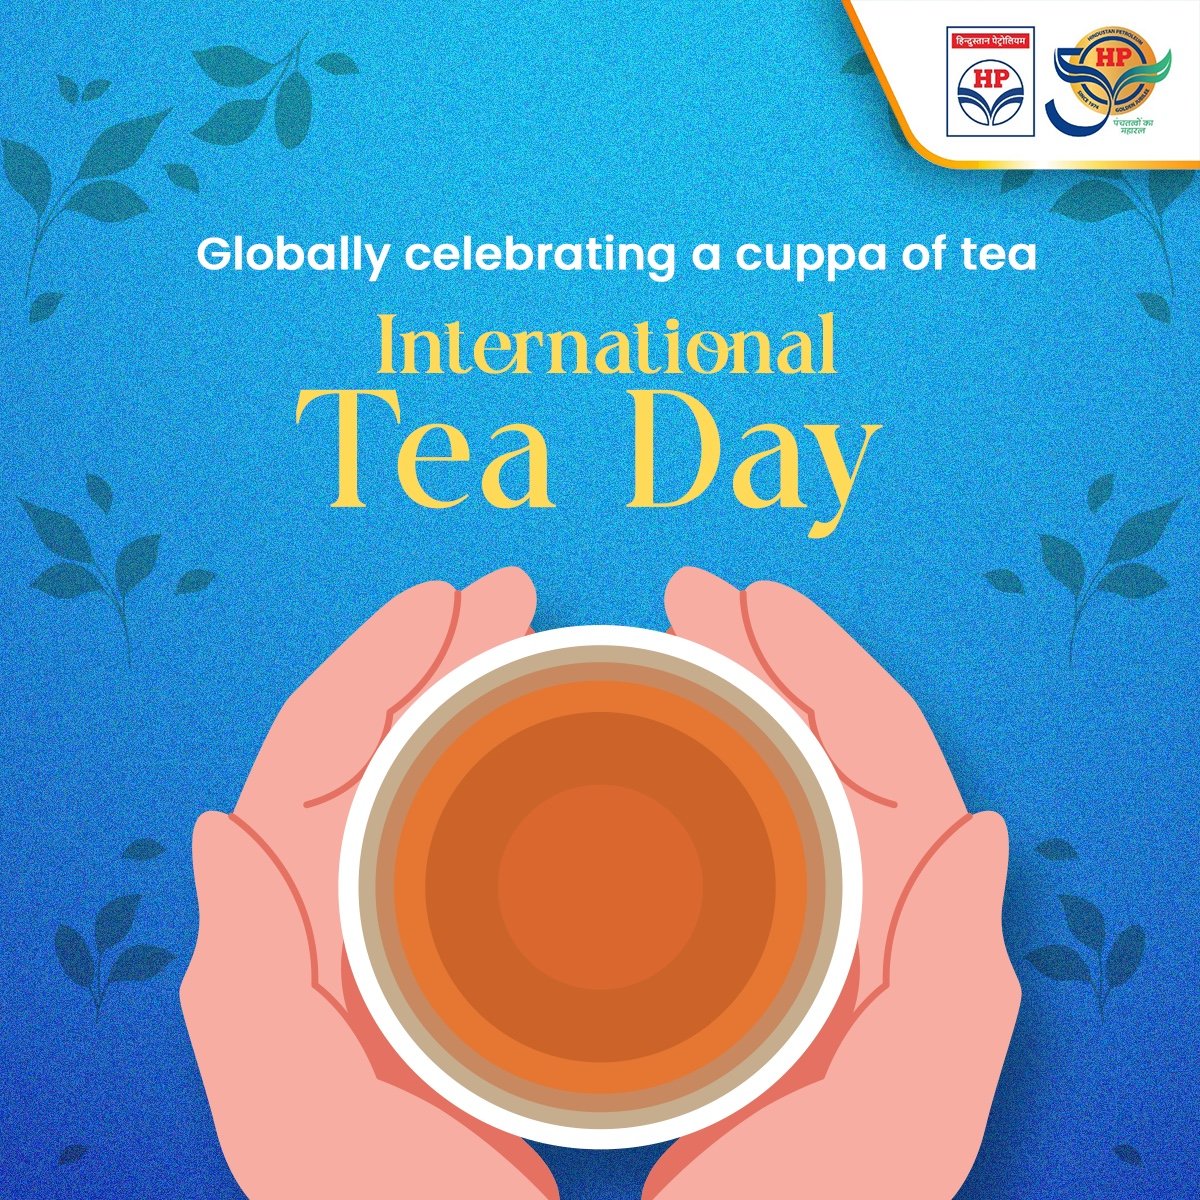 Who doesn’t enjoy a cup of tea? The Food and Agriculture Organization (FAO) of the United Nations celebrates May 21 as International Tea Day to promote sustainable production and consumption of tea around the world.

#InternationalTeaDay #HPCL #DeliveringHappiness